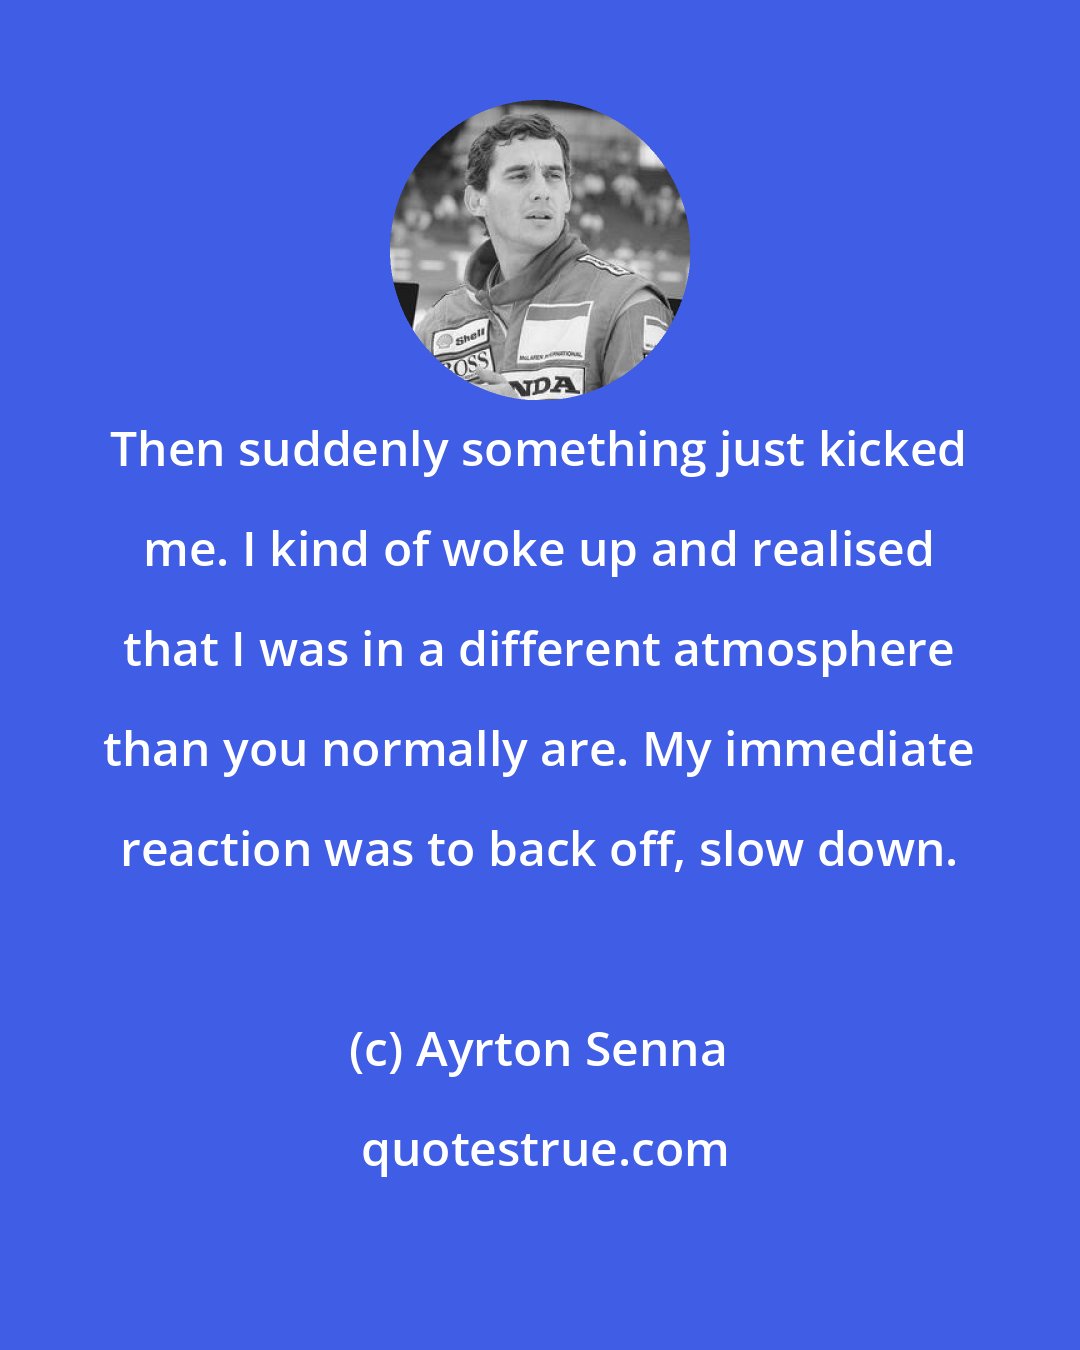 Ayrton Senna: Then suddenly something just kicked me. I kind of woke up and realised that I was in a different atmosphere than you normally are. My immediate reaction was to back off, slow down.